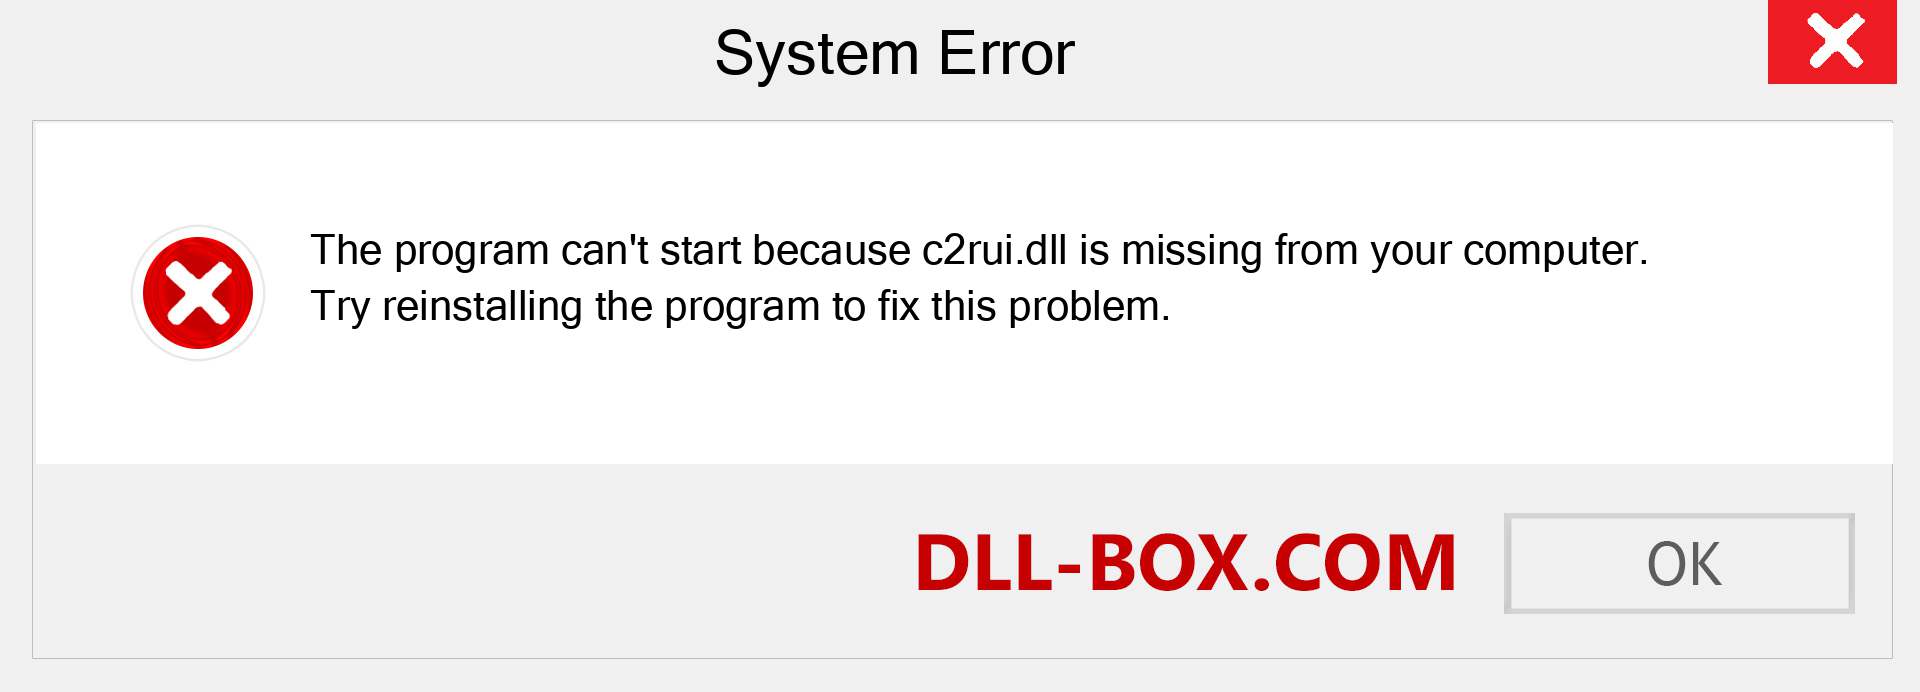  c2rui.dll file is missing?. Download for Windows 7, 8, 10 - Fix  c2rui dll Missing Error on Windows, photos, images